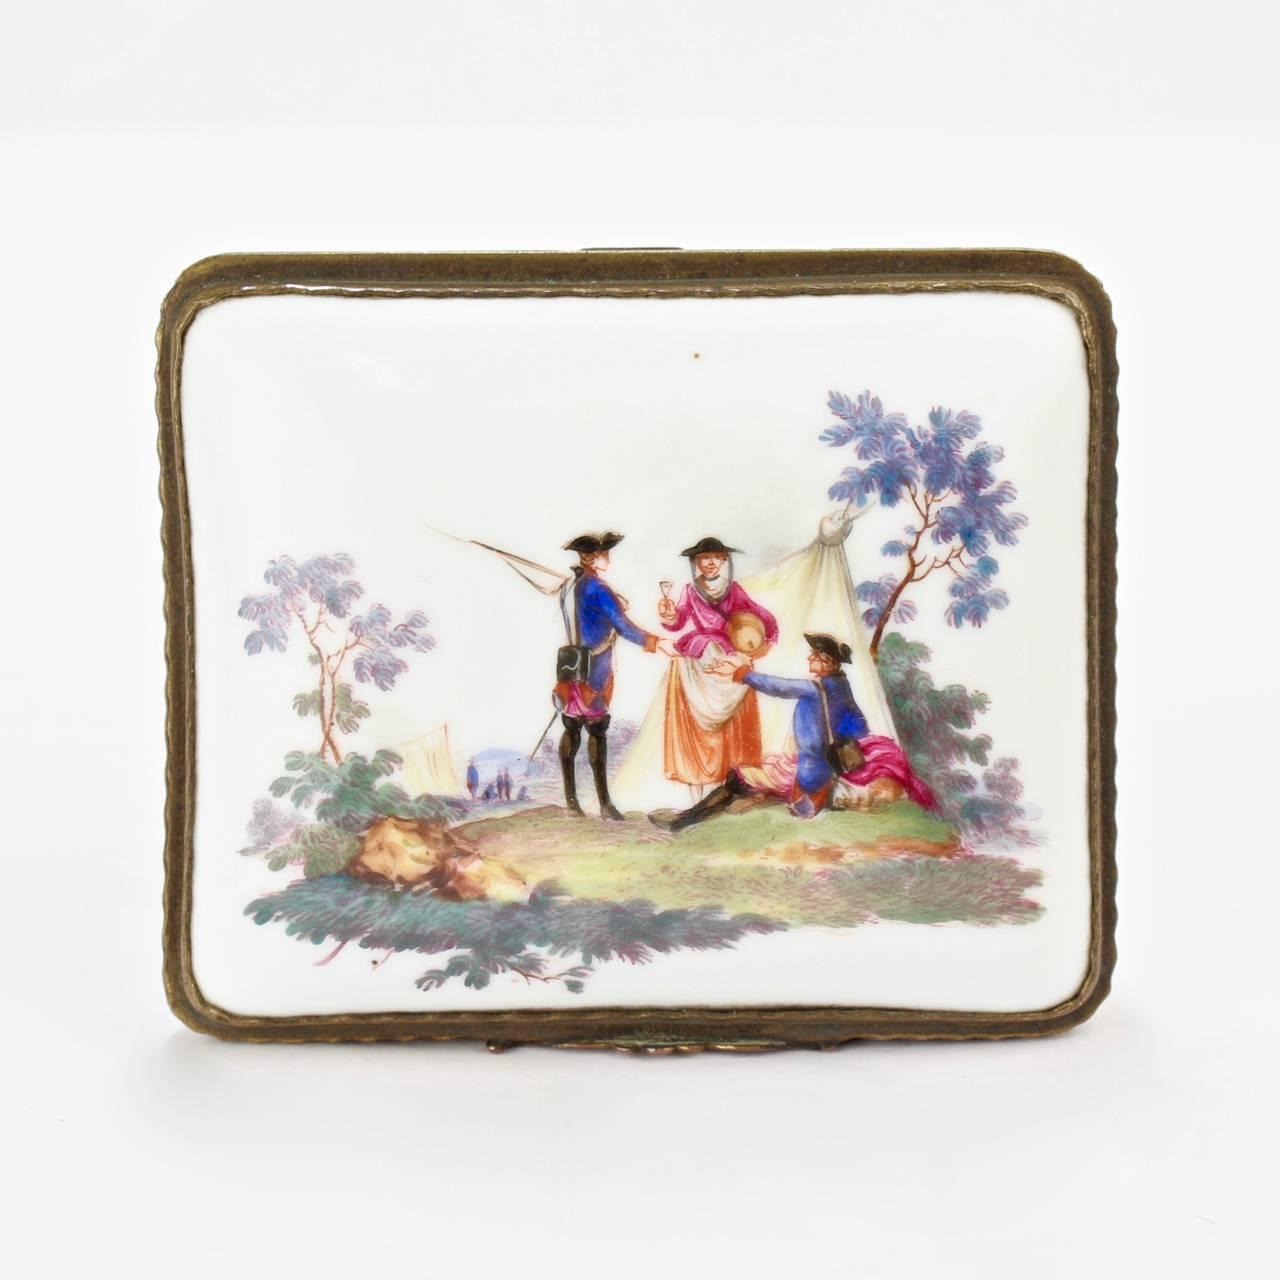 Rococo Antique 18th Century French or German Porcelain Snuff Box Military Scenes